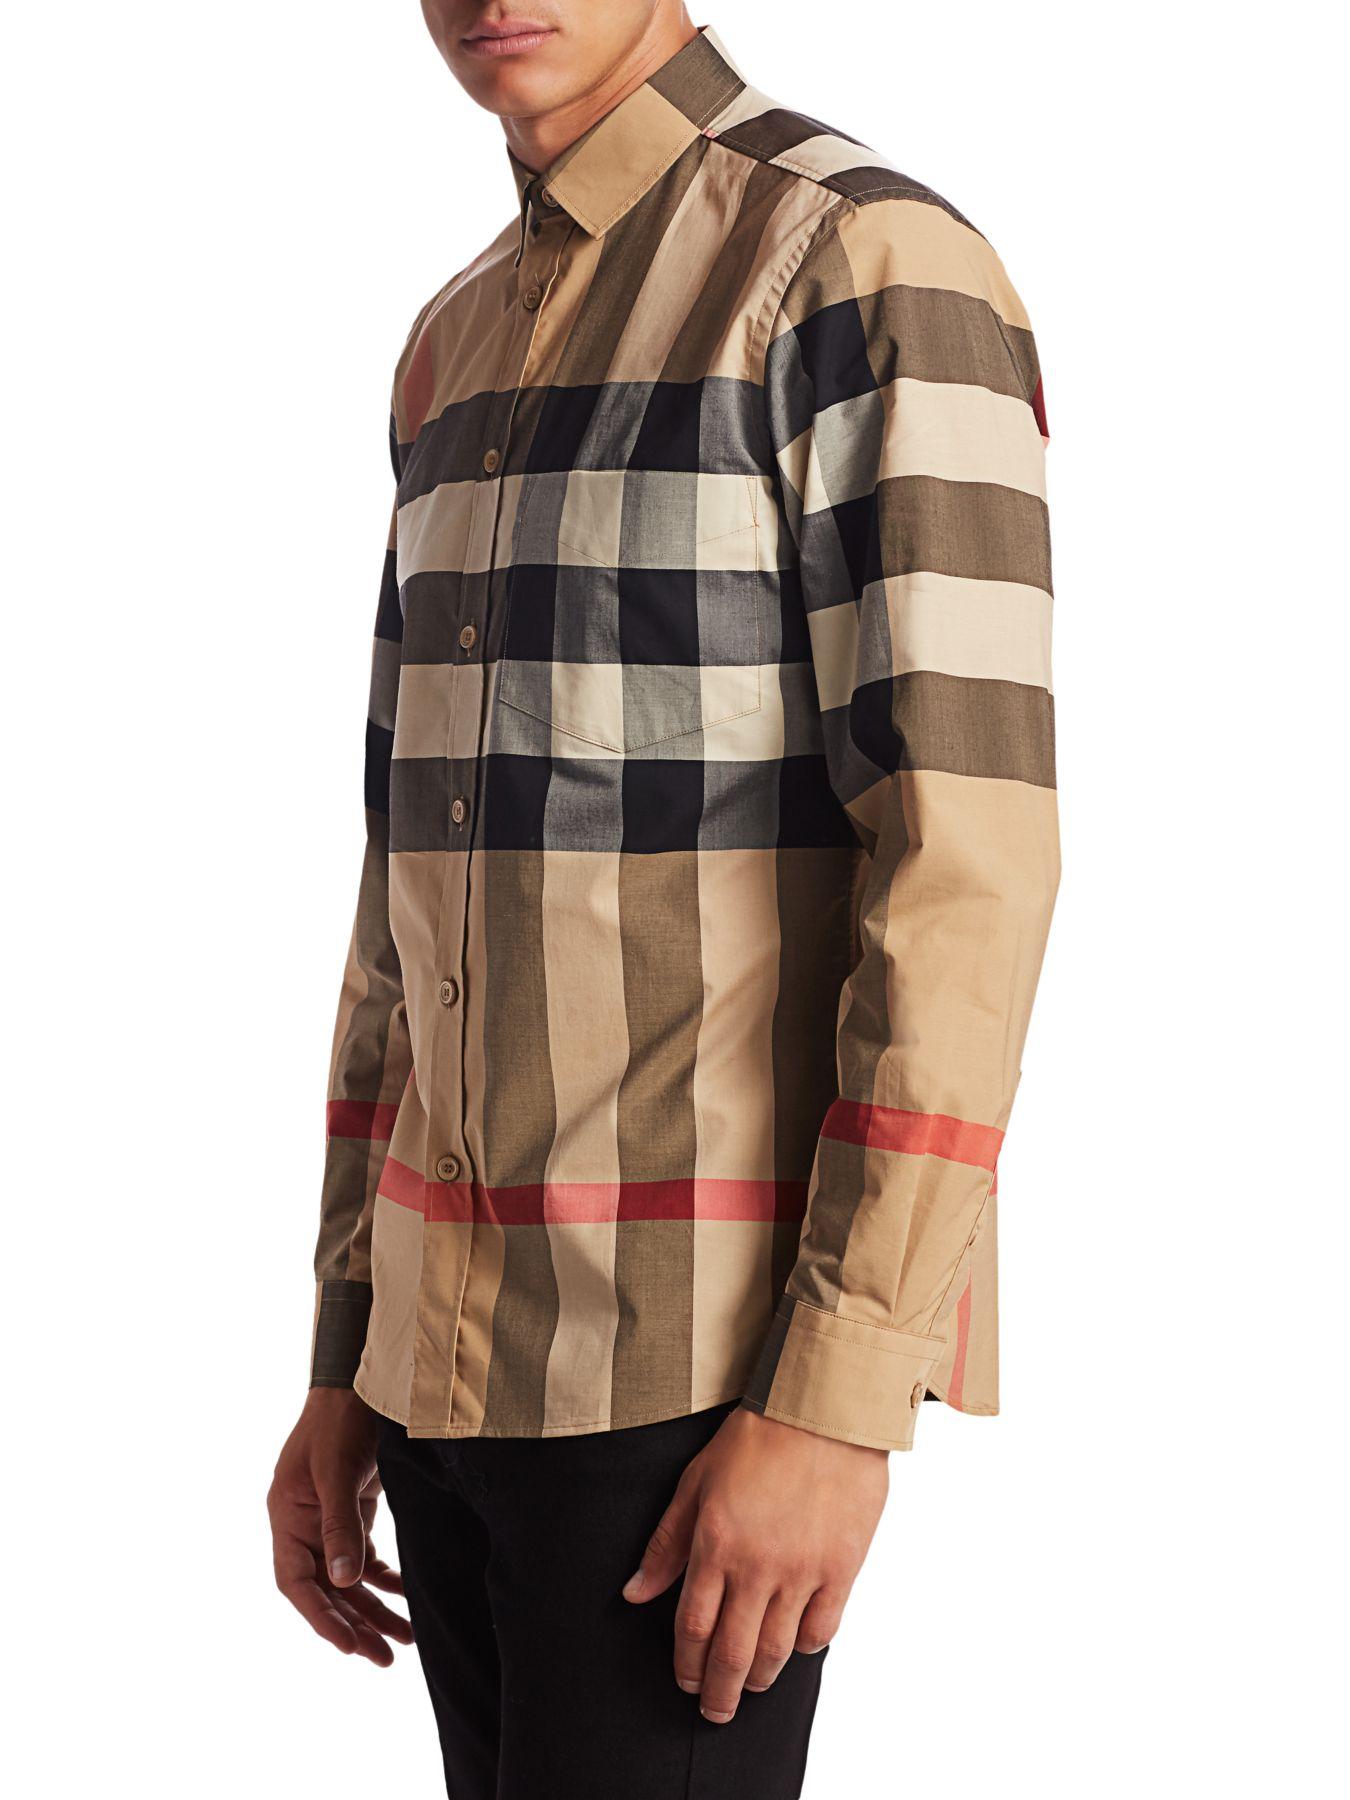 Burberry Cotton Shirt in Beige (Natural) for Men - Save 9% - Lyst